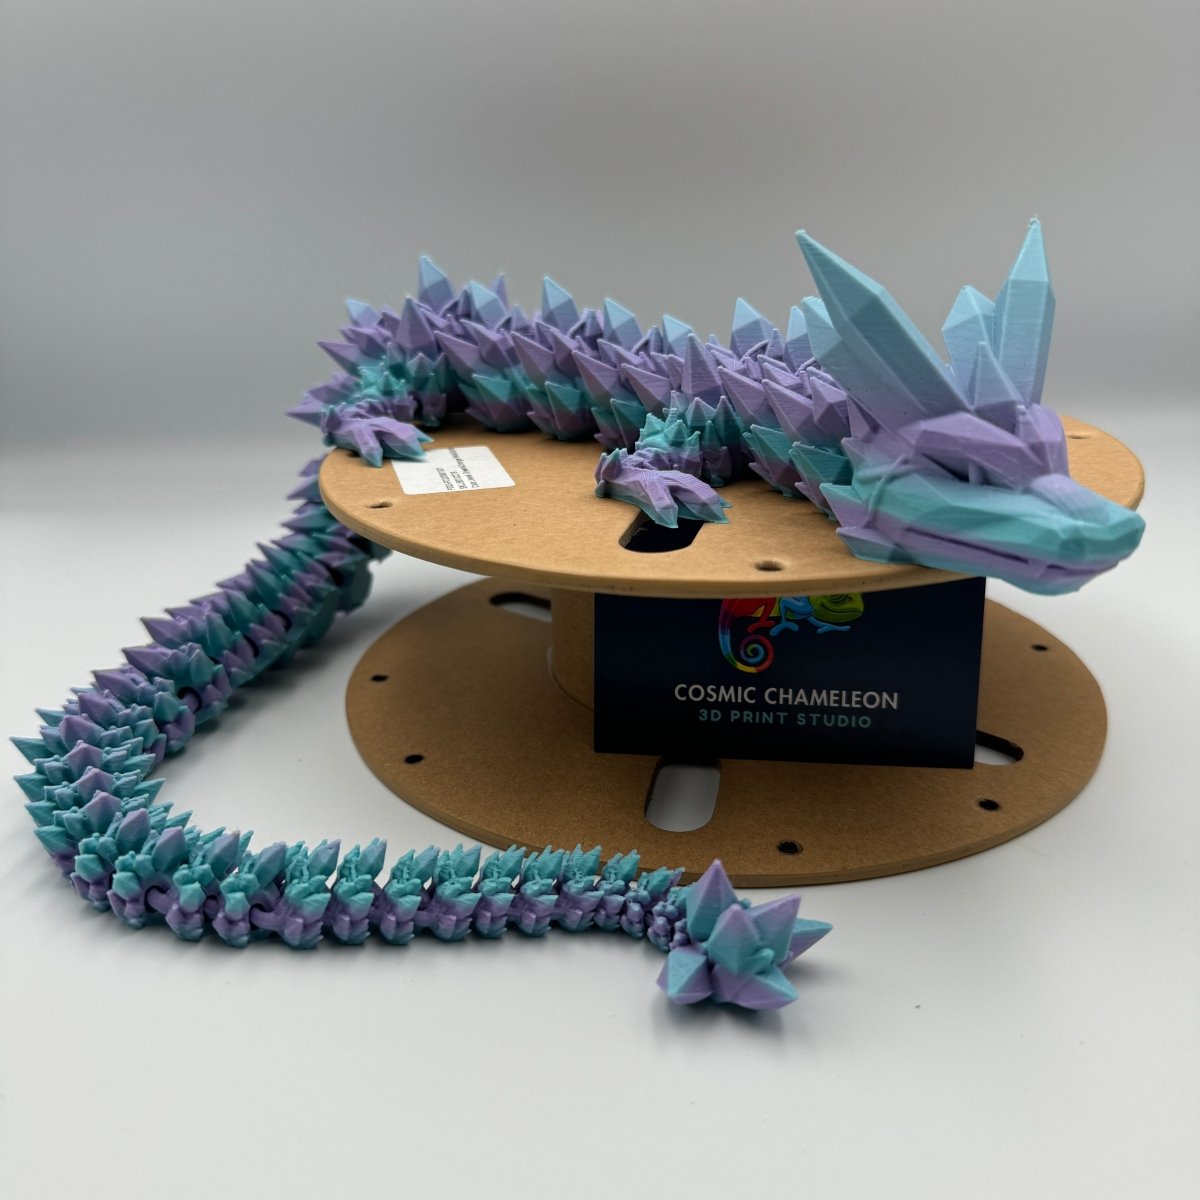 Crystal Dragon: Exquisite 3D Printed Flexible Crystal Dragon Sculpture - Cosmic Chameleon